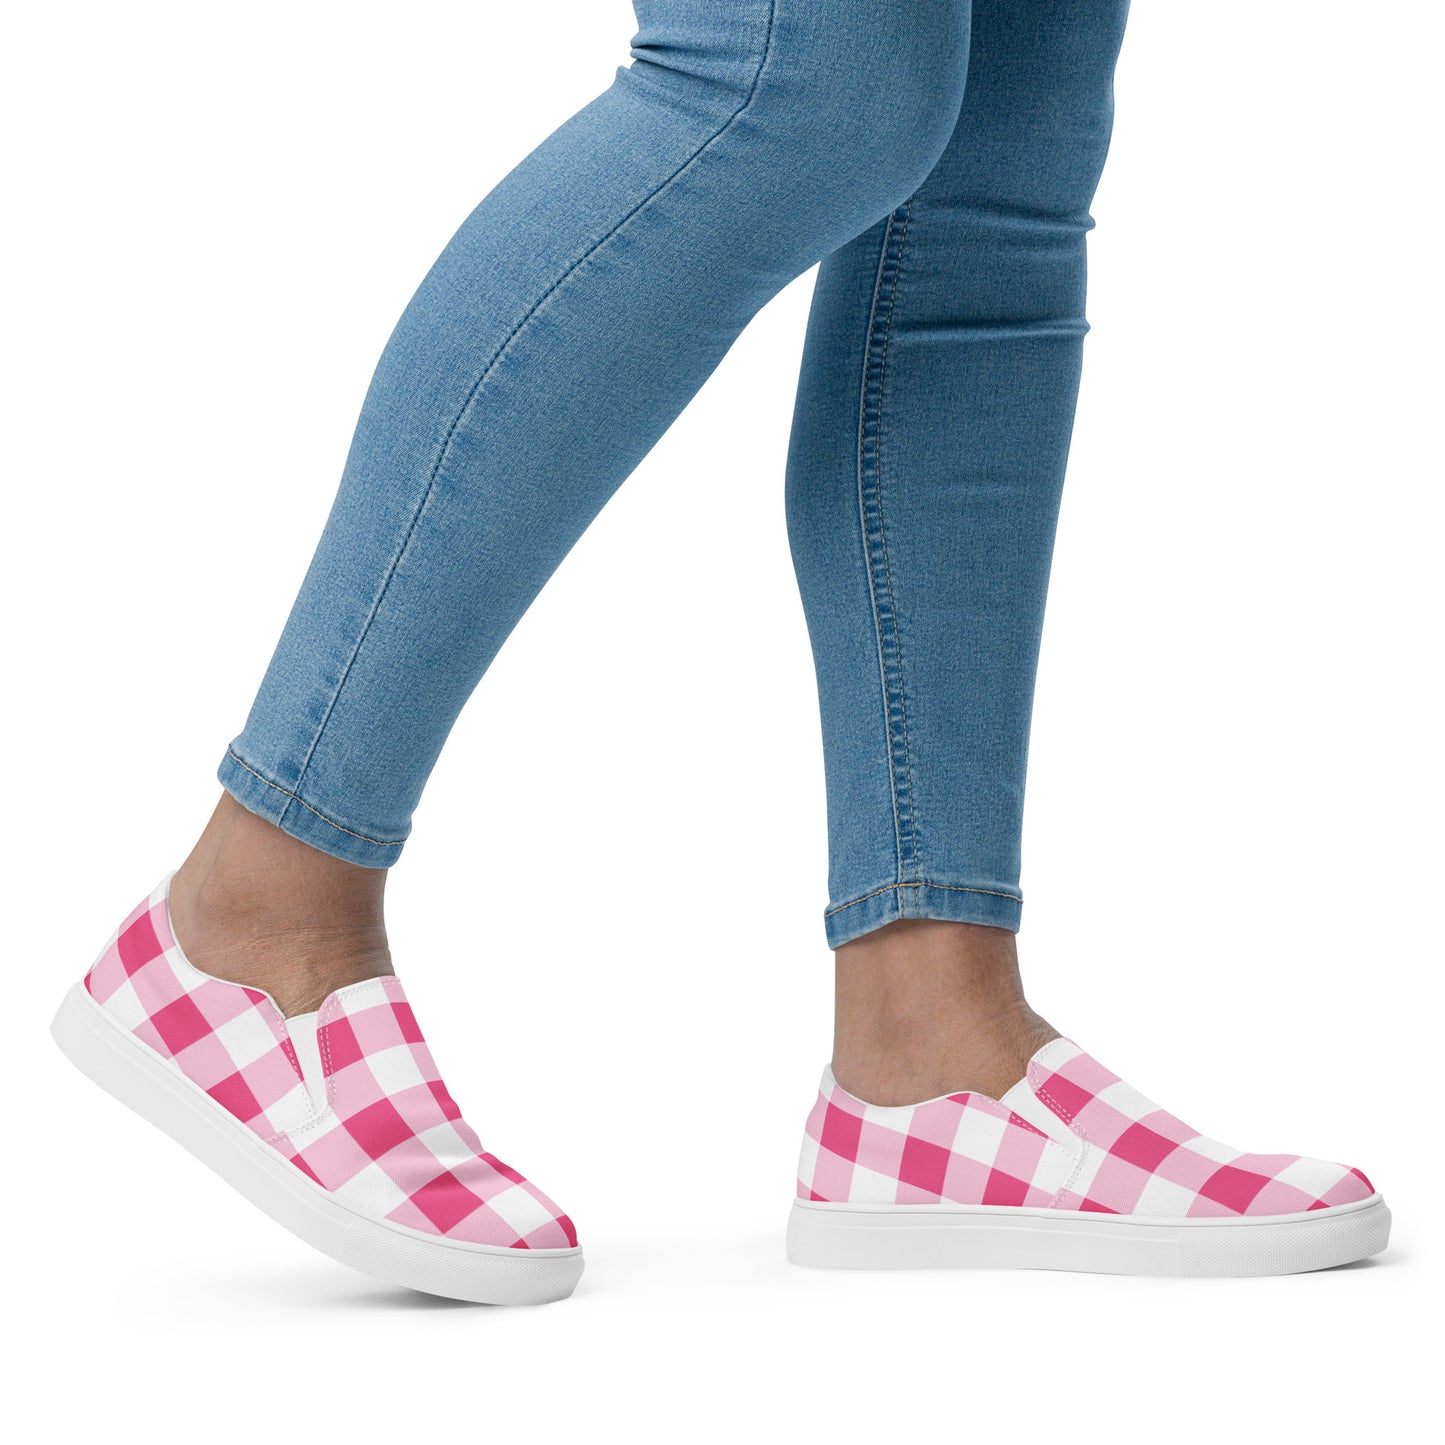 Everything Nice Pink Gingham Women’s Canvas Slip-On Flat Deck Shoes | Pinup Couture Relaxed